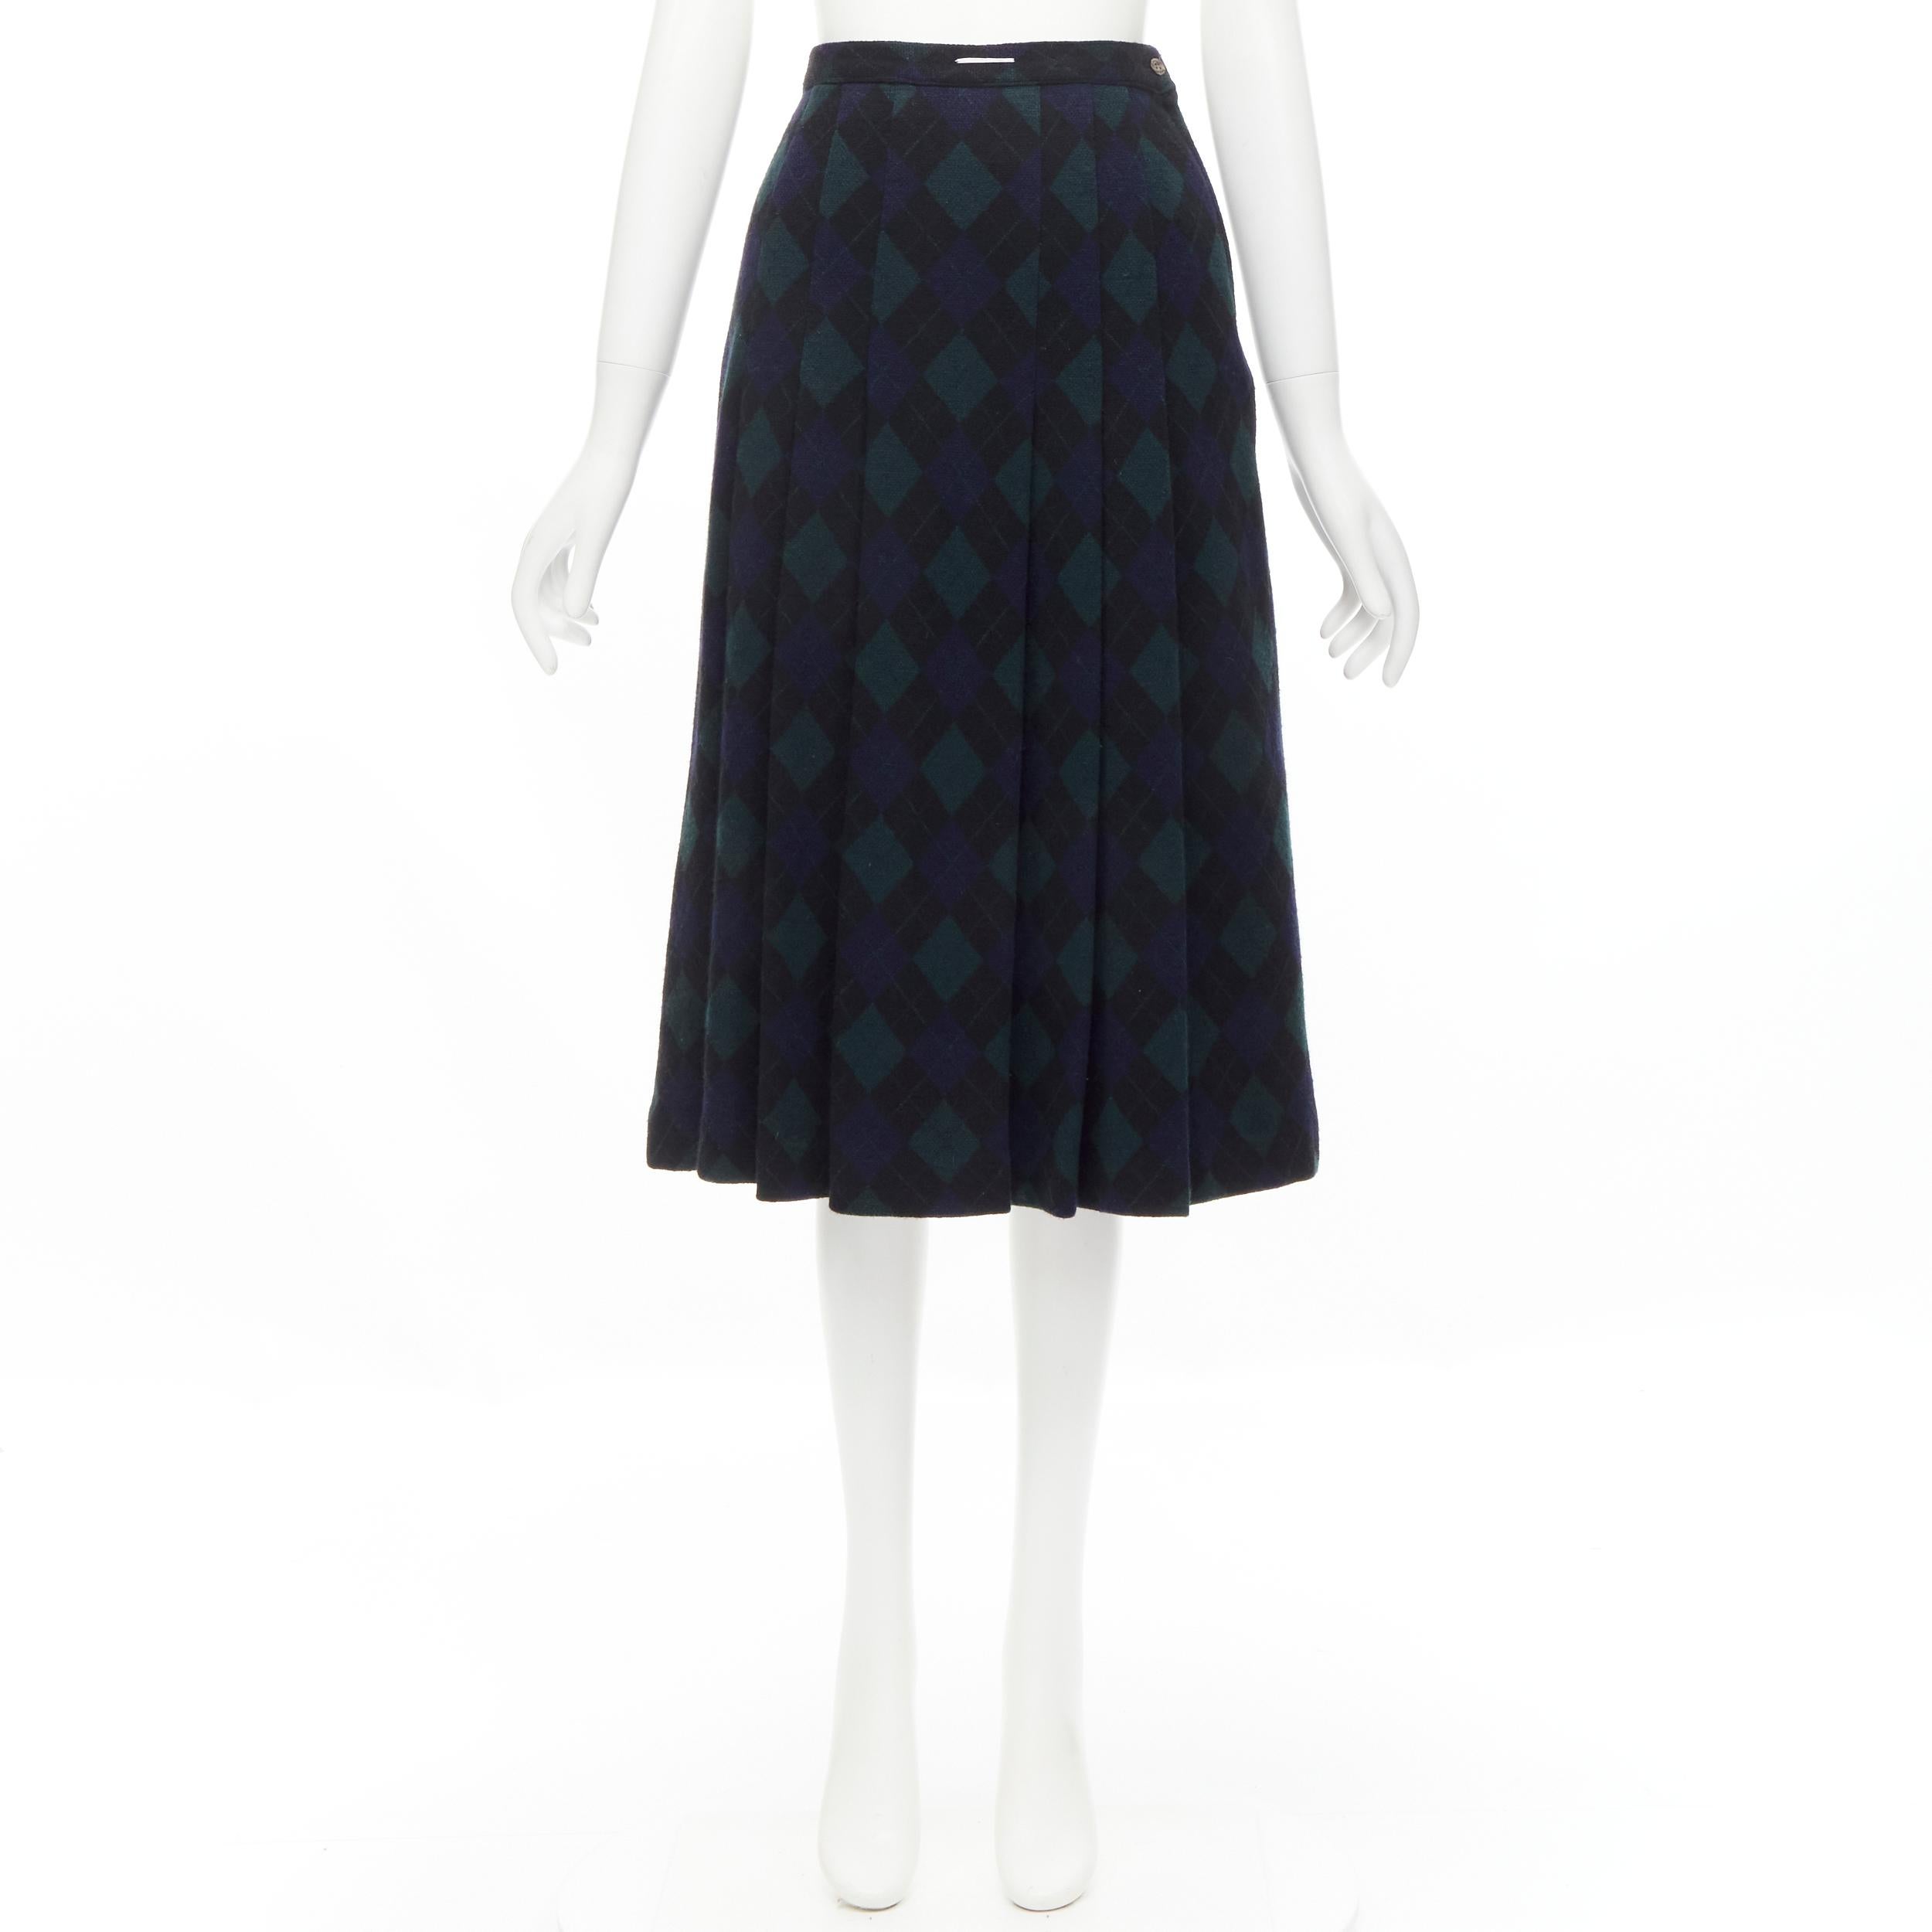 COMME DES GARCONS 1970s Vintage navy green plaid check pleated midi skirt S 4